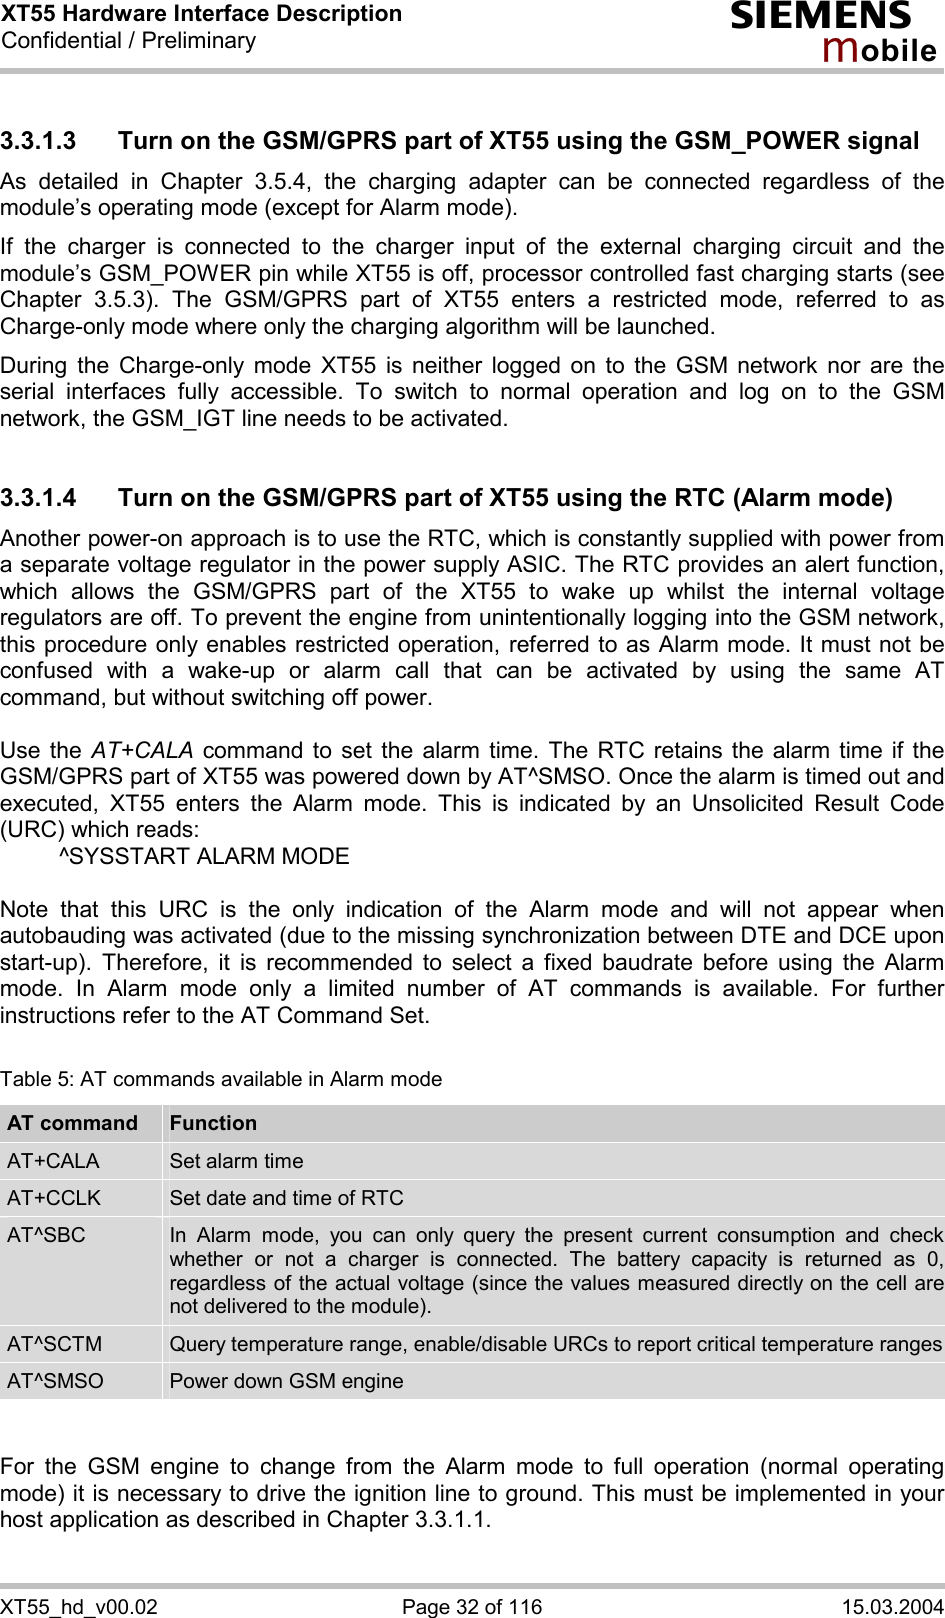 XT55 Hardware Interface Description Confidential / Preliminary s mo b i l e XT55_hd_v00.02  Page 32 of 116  15.03.2004 3.3.1.3  Turn on the GSM/GPRS part of XT55 using the GSM_POWER signal As detailed in Chapter 3.5.4, the charging adapter can be connected regardless of the module’s operating mode (except for Alarm mode).  If the charger is connected to the charger input of the external charging circuit and the module’s GSM_POWER pin while XT55 is off, processor controlled fast charging starts (see Chapter 3.5.3). The GSM/GPRS part of XT55 enters a restricted mode, referred to as Charge-only mode where only the charging algorithm will be launched. During the Charge-only mode XT55 is neither logged on to the GSM network nor are the serial interfaces fully accessible. To switch to normal operation and log on to the GSM network, the GSM_IGT line needs to be activated.  3.3.1.4  Turn on the GSM/GPRS part of XT55 using the RTC (Alarm mode) Another power-on approach is to use the RTC, which is constantly supplied with power from a separate voltage regulator in the power supply ASIC. The RTC provides an alert function, which allows the GSM/GPRS part of the XT55 to wake up whilst the internal voltage regulators are off. To prevent the engine from unintentionally logging into the GSM network, this procedure only enables restricted operation, referred to as Alarm mode. It must not be confused with a wake-up or alarm call that can be activated by using the same AT command, but without switching off power.  Use the AT+CALA command to set the alarm time. The RTC retains the alarm time if the GSM/GPRS part of XT55 was powered down by AT^SMSO. Once the alarm is timed out and executed, XT55 enters the Alarm mode. This is indicated by an Unsolicited Result Code (URC) which reads:   ^SYSSTART ALARM MODE    Note that this URC is the only indication of the Alarm mode and will not appear when autobauding was activated (due to the missing synchronization between DTE and DCE upon start-up). Therefore, it is recommended to select a fixed baudrate before using the Alarm mode. In Alarm mode only a limited number of AT commands is available. For further instructions refer to the AT Command Set.  Table 5: AT commands available in Alarm mode AT command  Function AT+CALA  Set alarm time AT+CCLK  Set date and time of RTC AT^SBC  In Alarm mode, you can only query the present current consumption and check whether or not a charger is connected. The battery capacity is returned as 0, regardless of the actual voltage (since the values measured directly on the cell are not delivered to the module). AT^SCTM  Query temperature range, enable/disable URCs to report critical temperature rangesAT^SMSO  Power down GSM engine   For the GSM engine to change from the Alarm mode to full operation (normal operating mode) it is necessary to drive the ignition line to ground. This must be implemented in your host application as described in Chapter 3.3.1.1.  